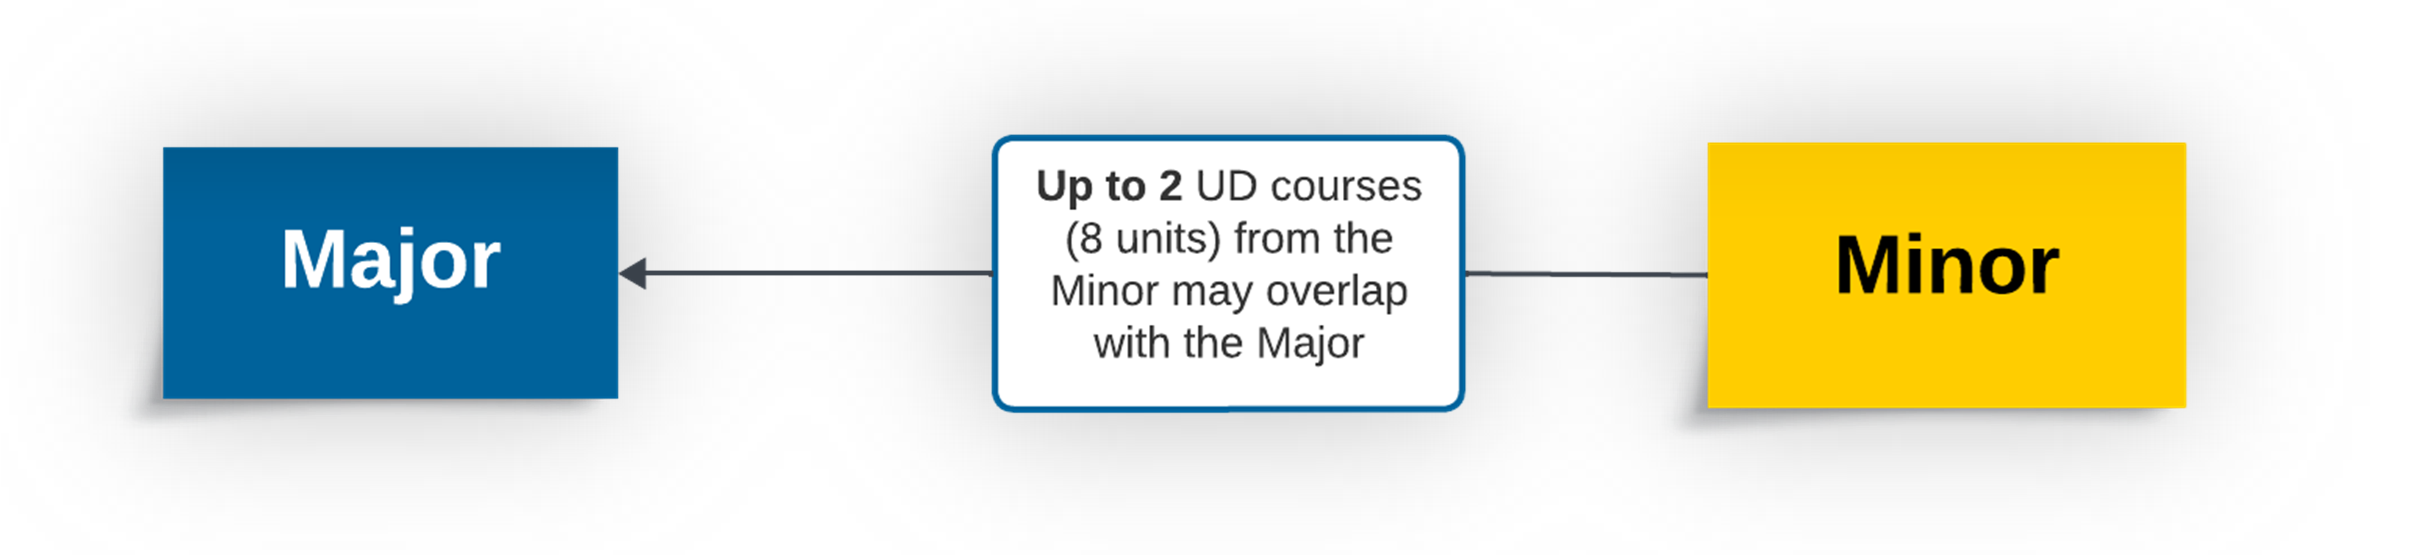 Up to 2 UD courses (8 units) from the Minor may overlap with the Major